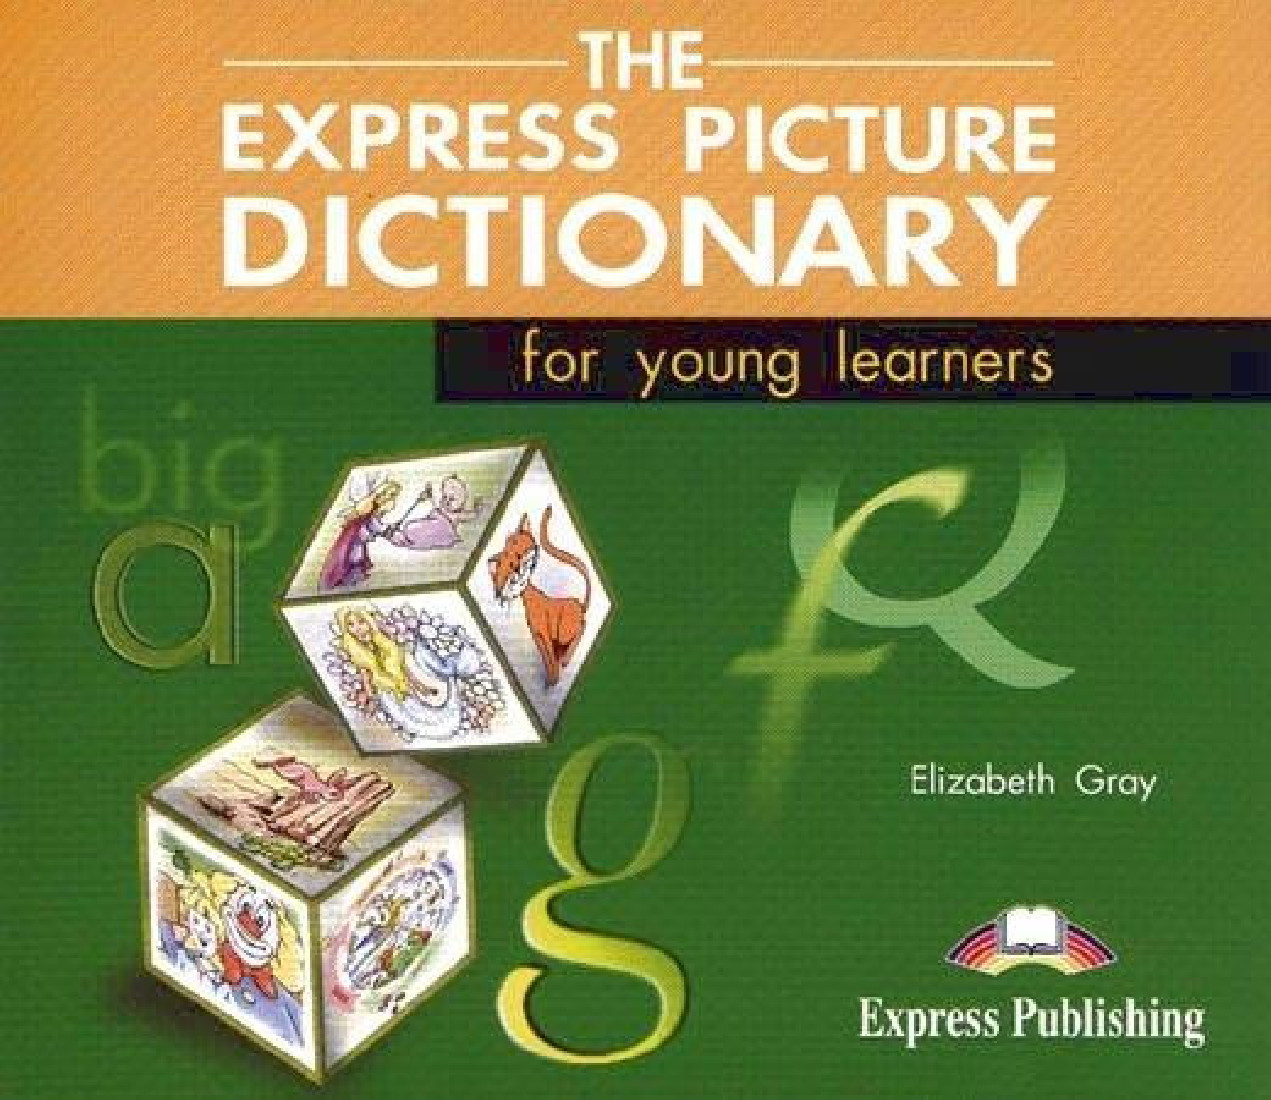 THE EXPRESS PICTURE DICTIONARY FOR YOUNG LEARNERS CDs